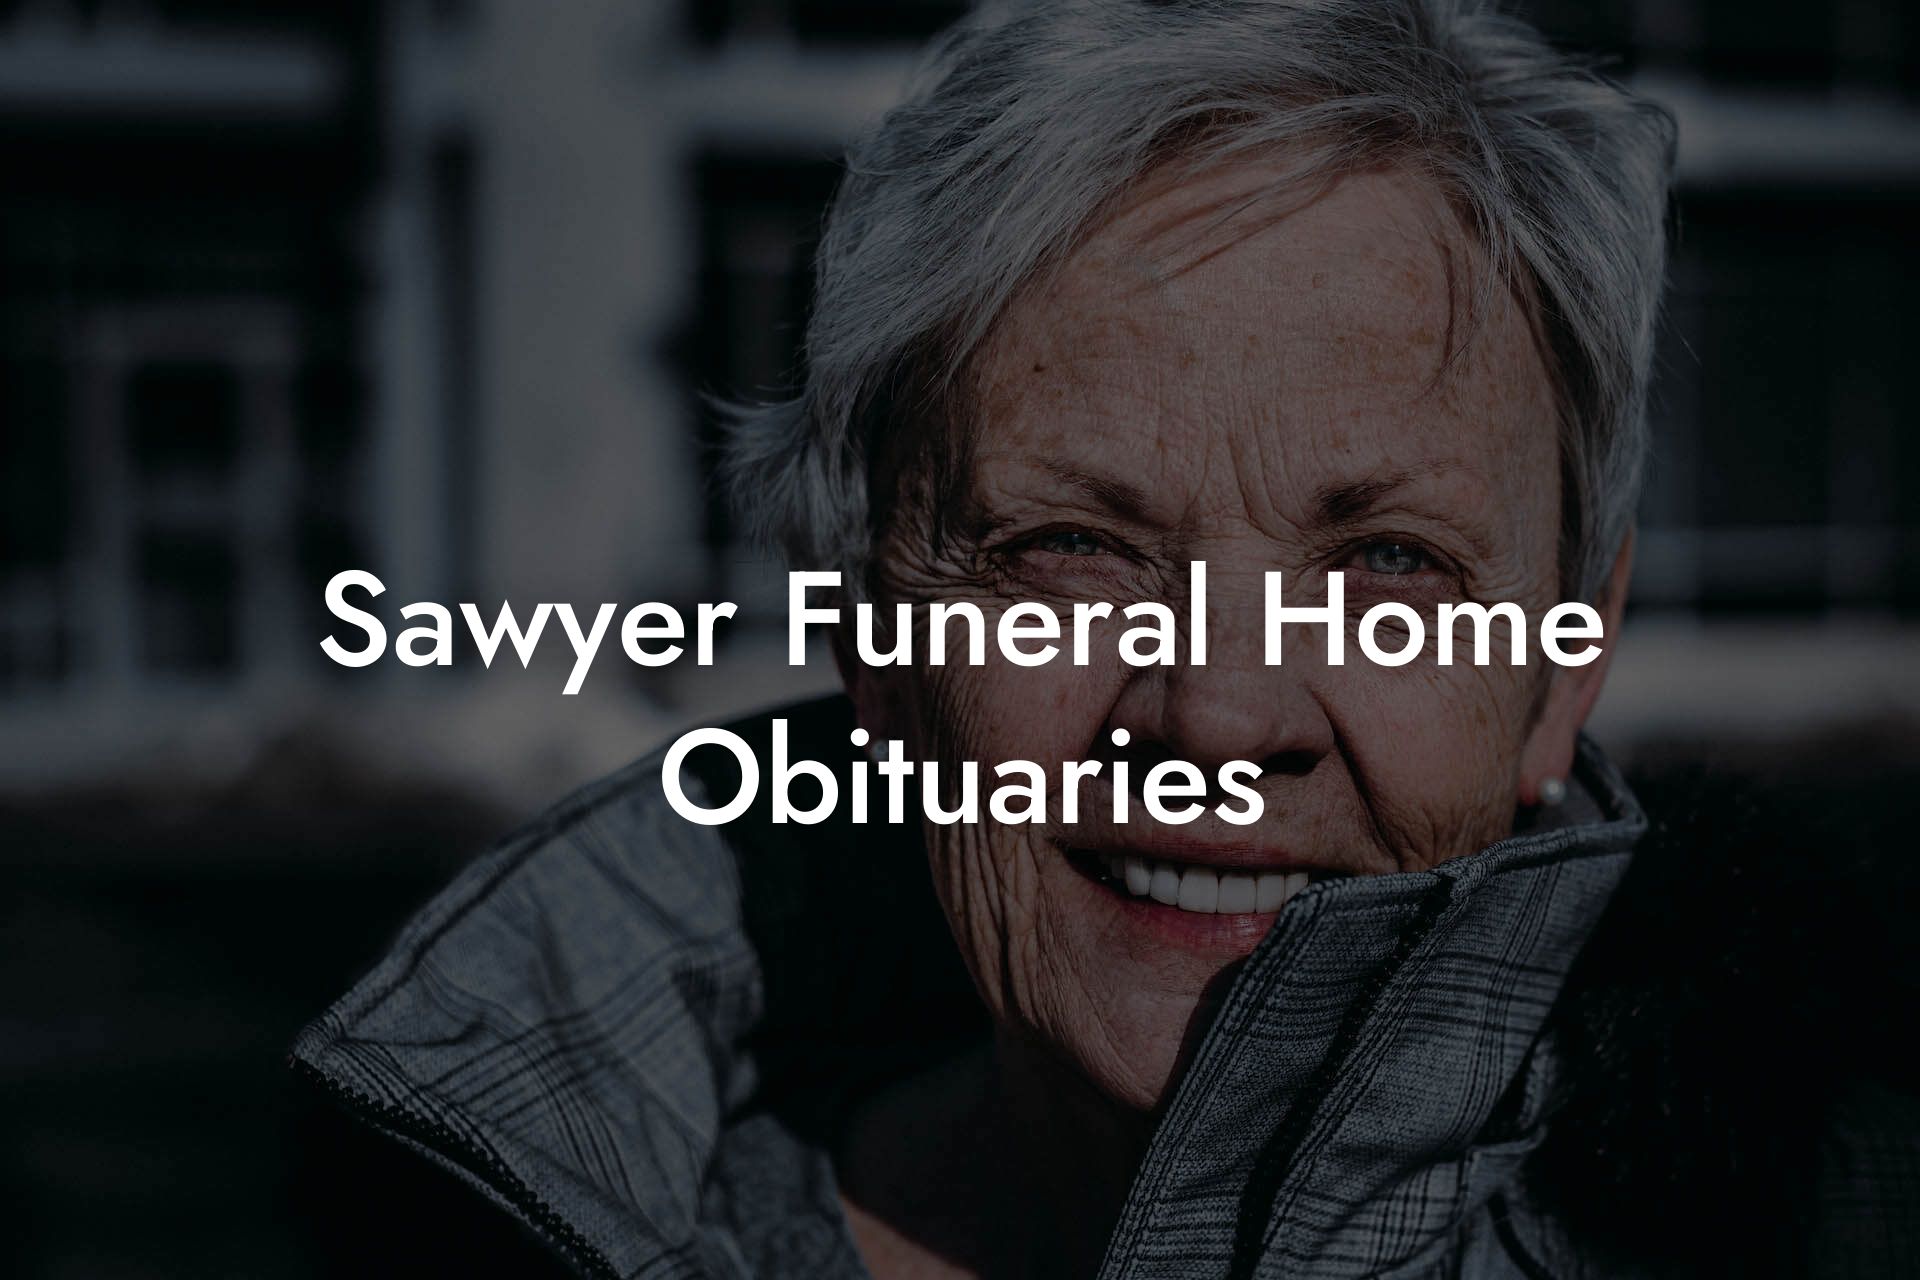 Sawyer Funeral Home Obituaries